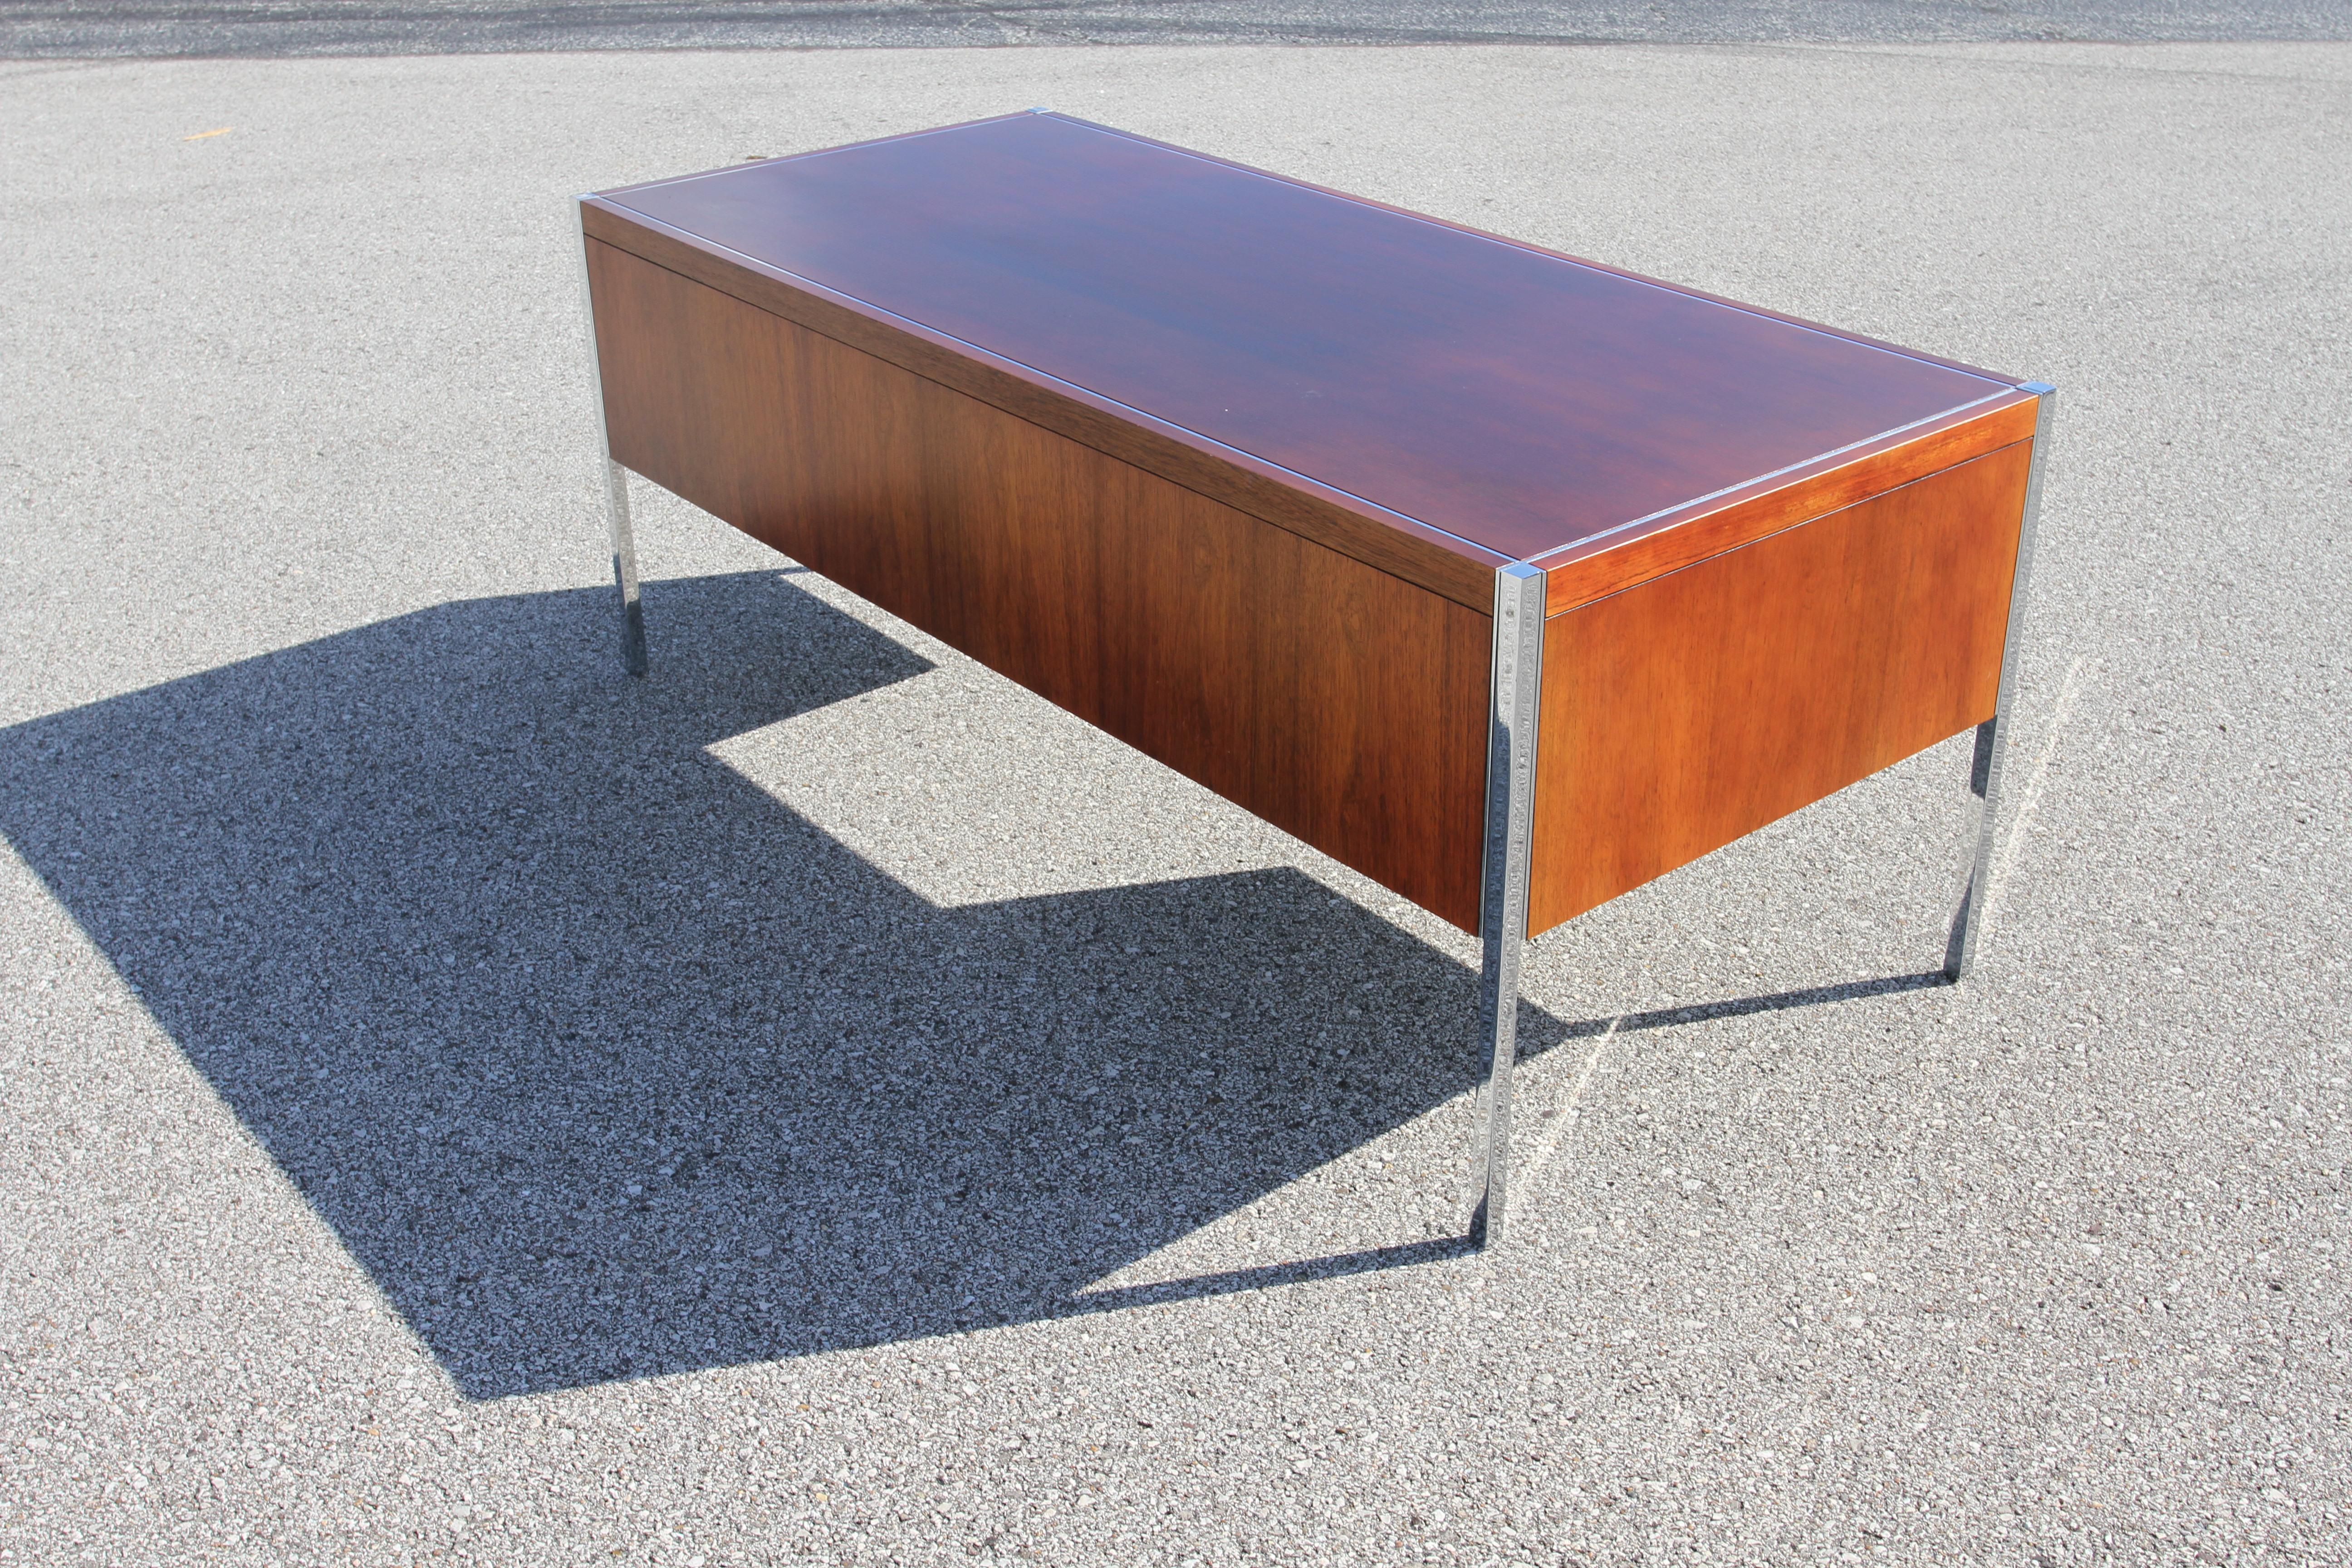 Richard Schultz for Knoll 1960s Mid-Century Modern Rosewood Executive Desk #4146 For Sale 6